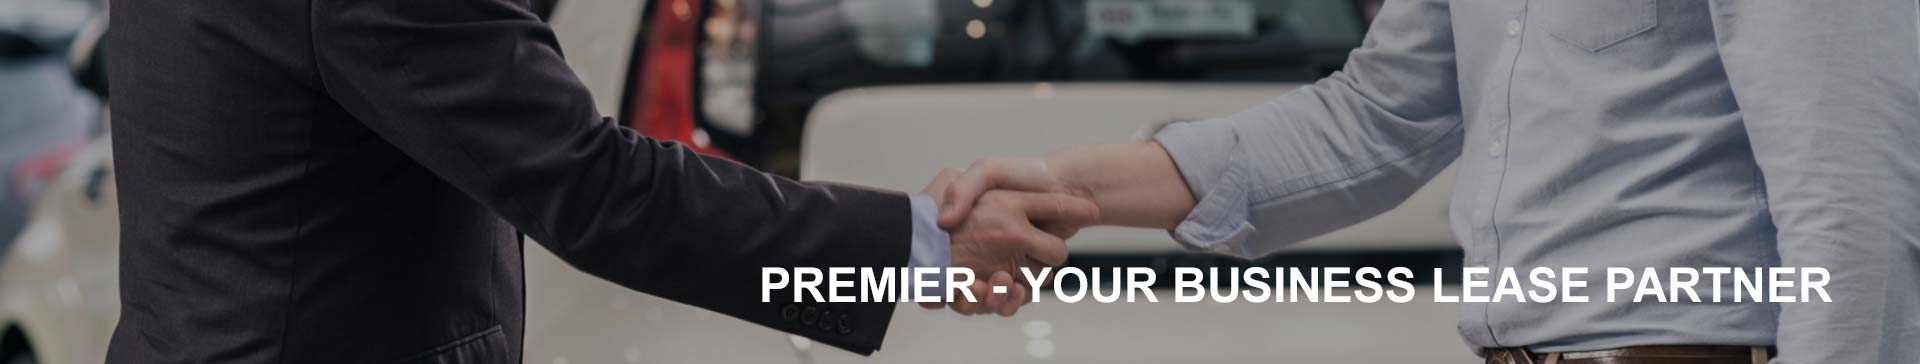 Premier Contract Hire and Leasing